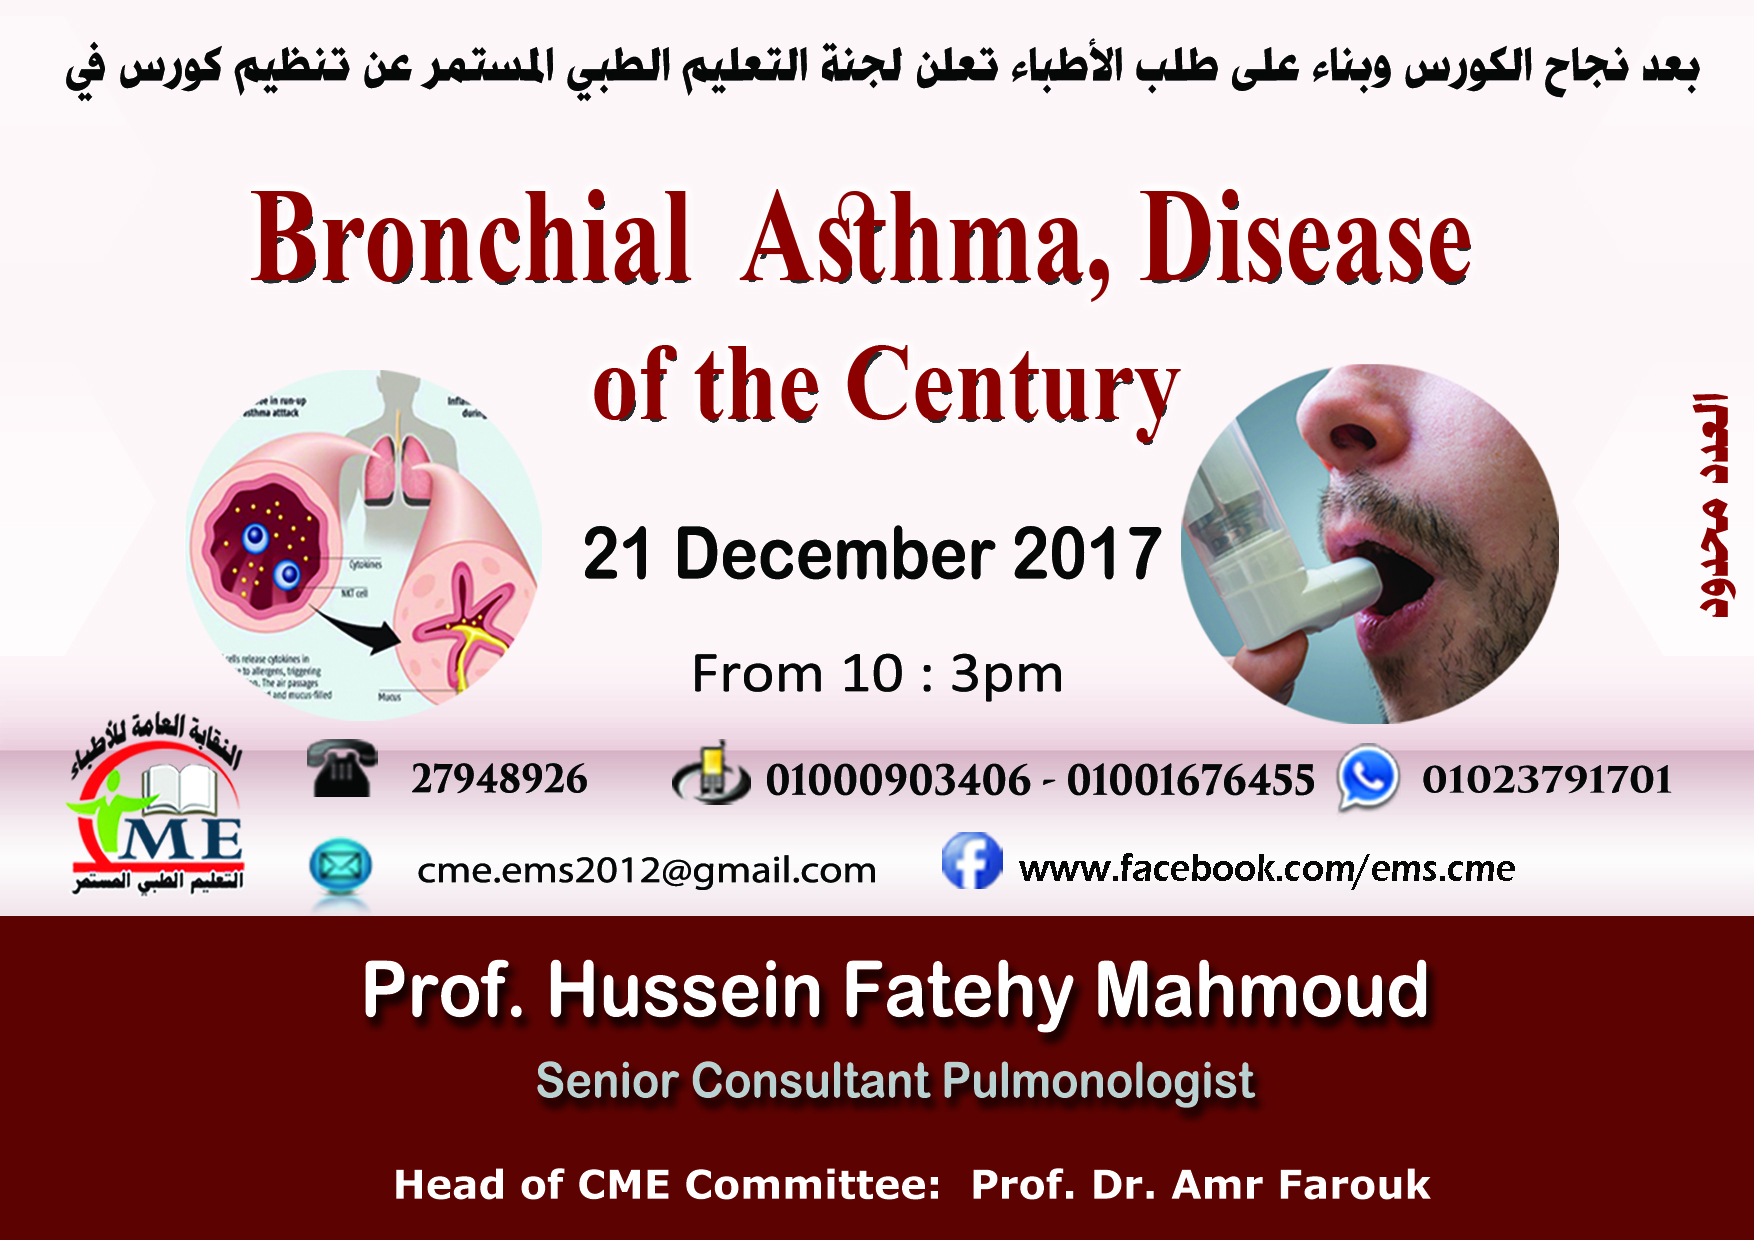 Bronchial Asthma, Disease of the Century